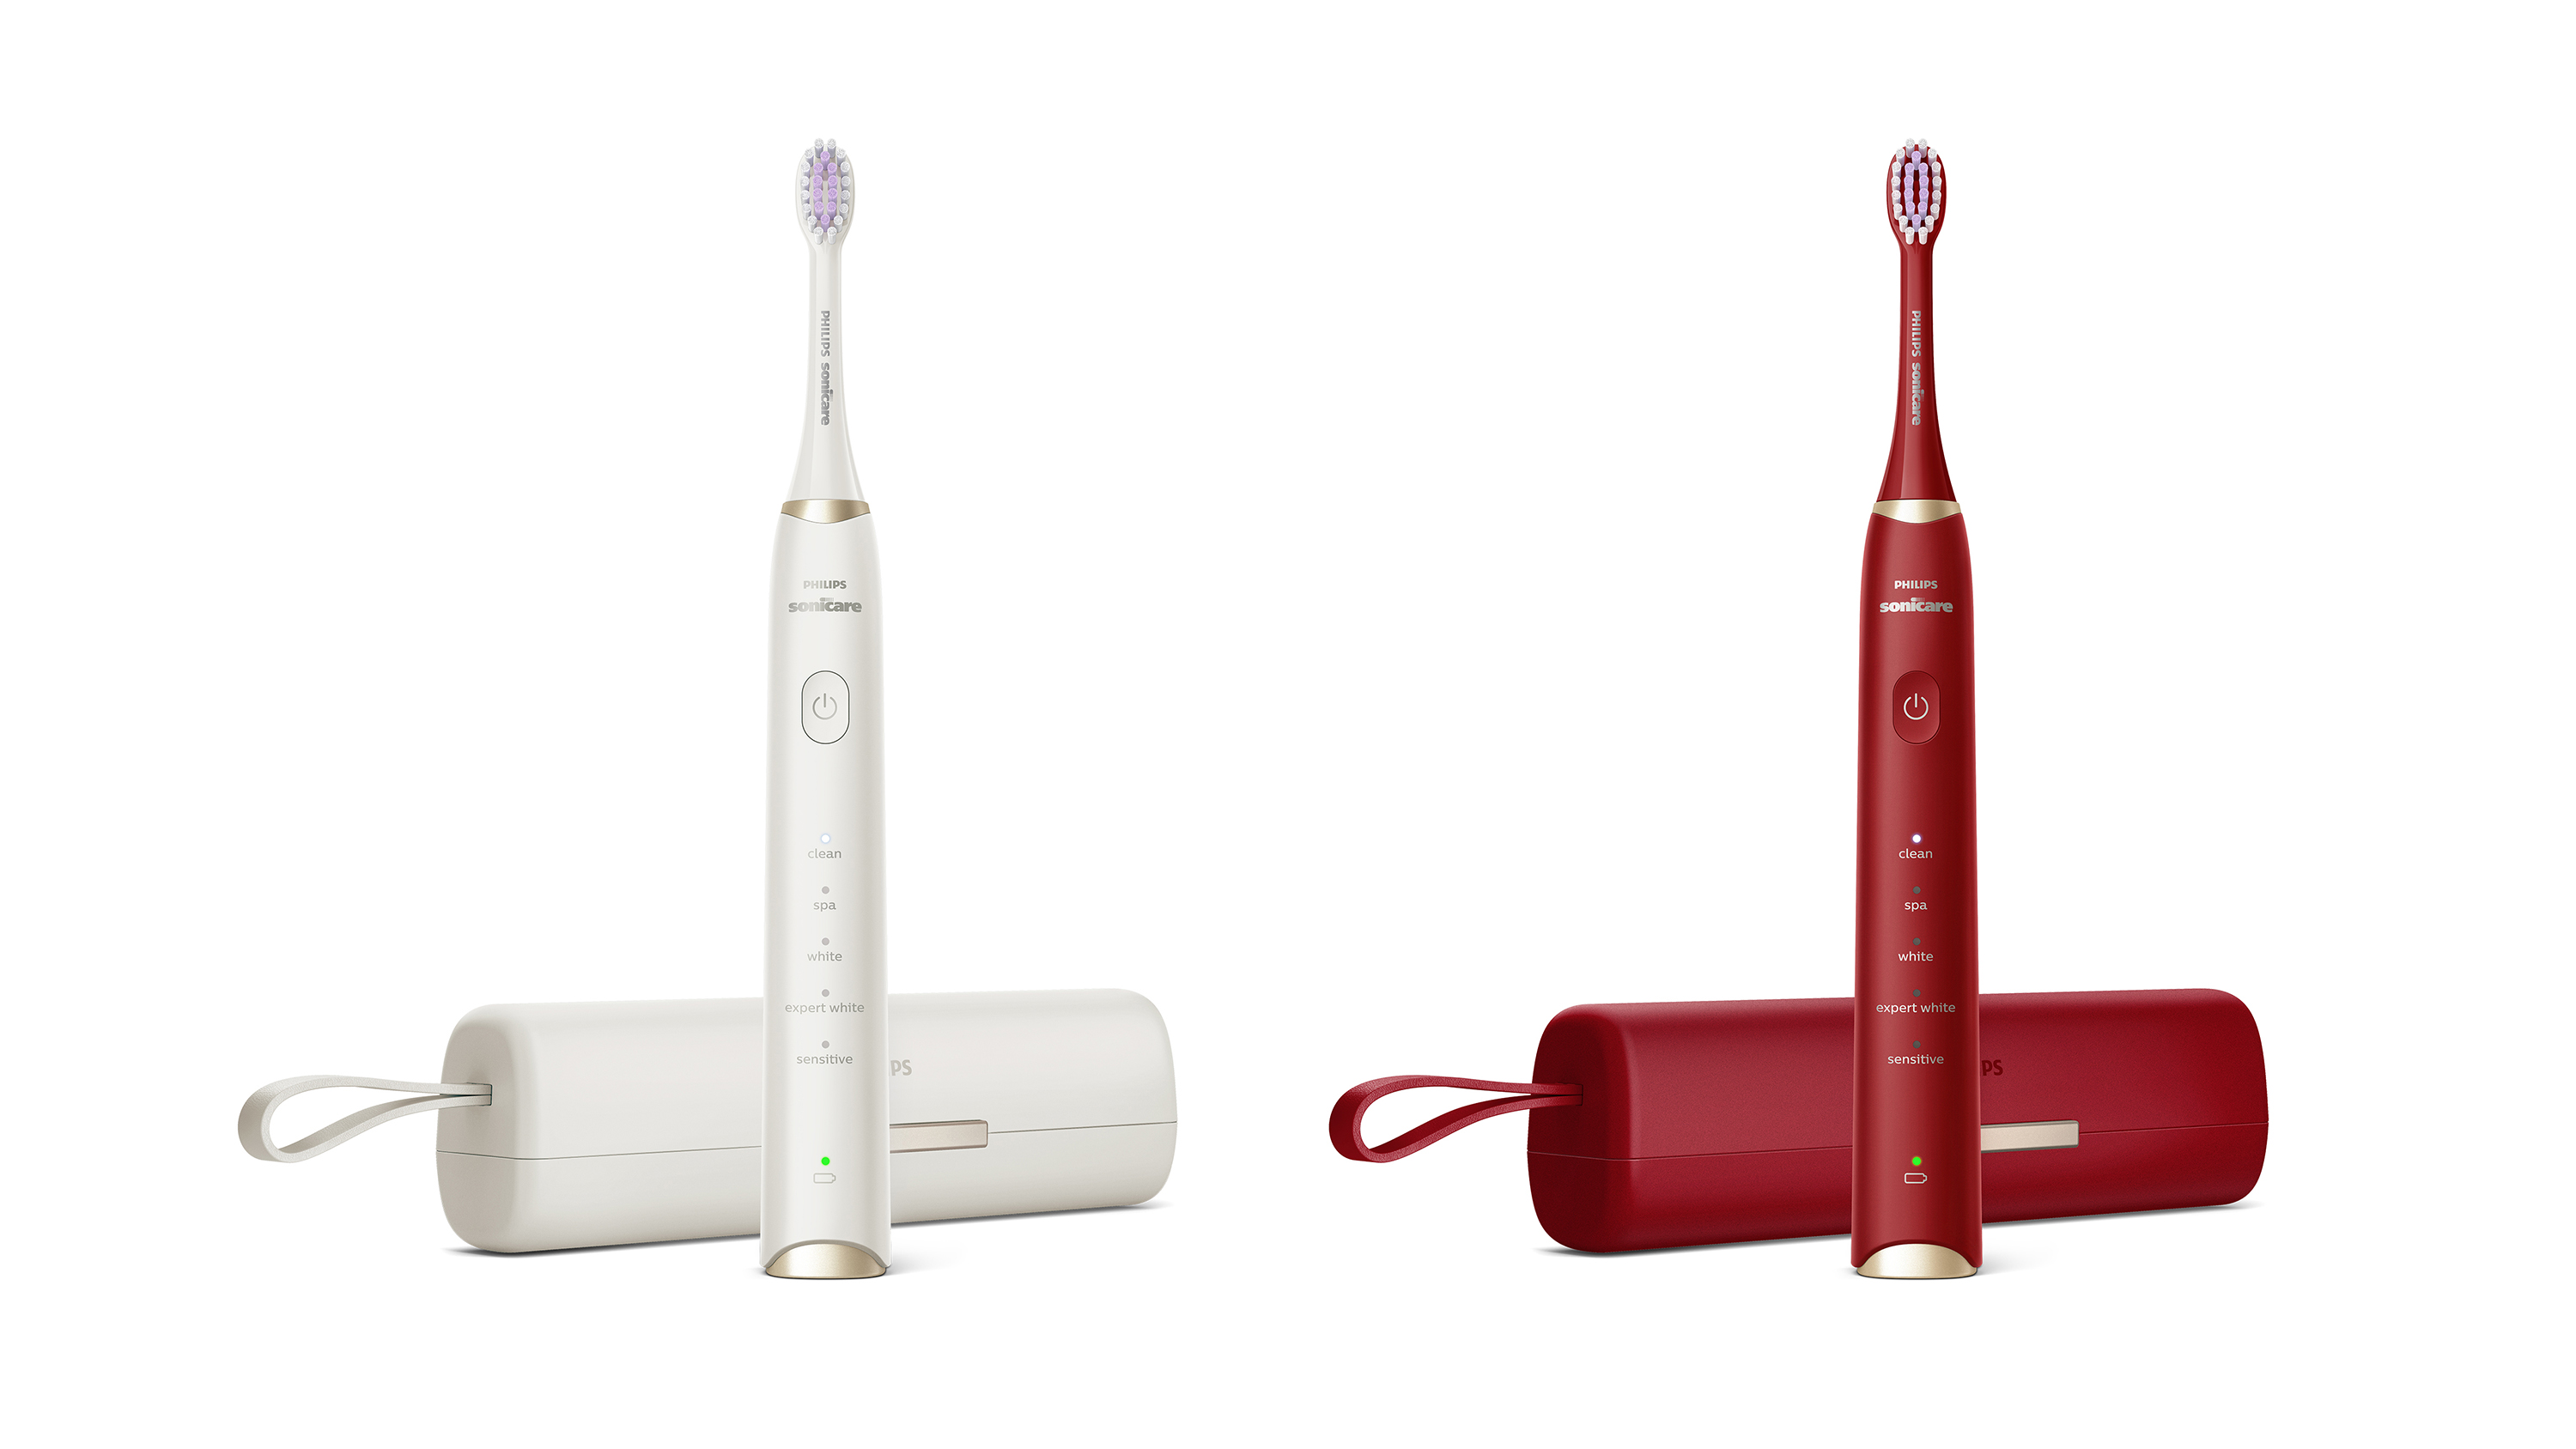 Philips Sonicare 3900 Series Electronic Toothbrush